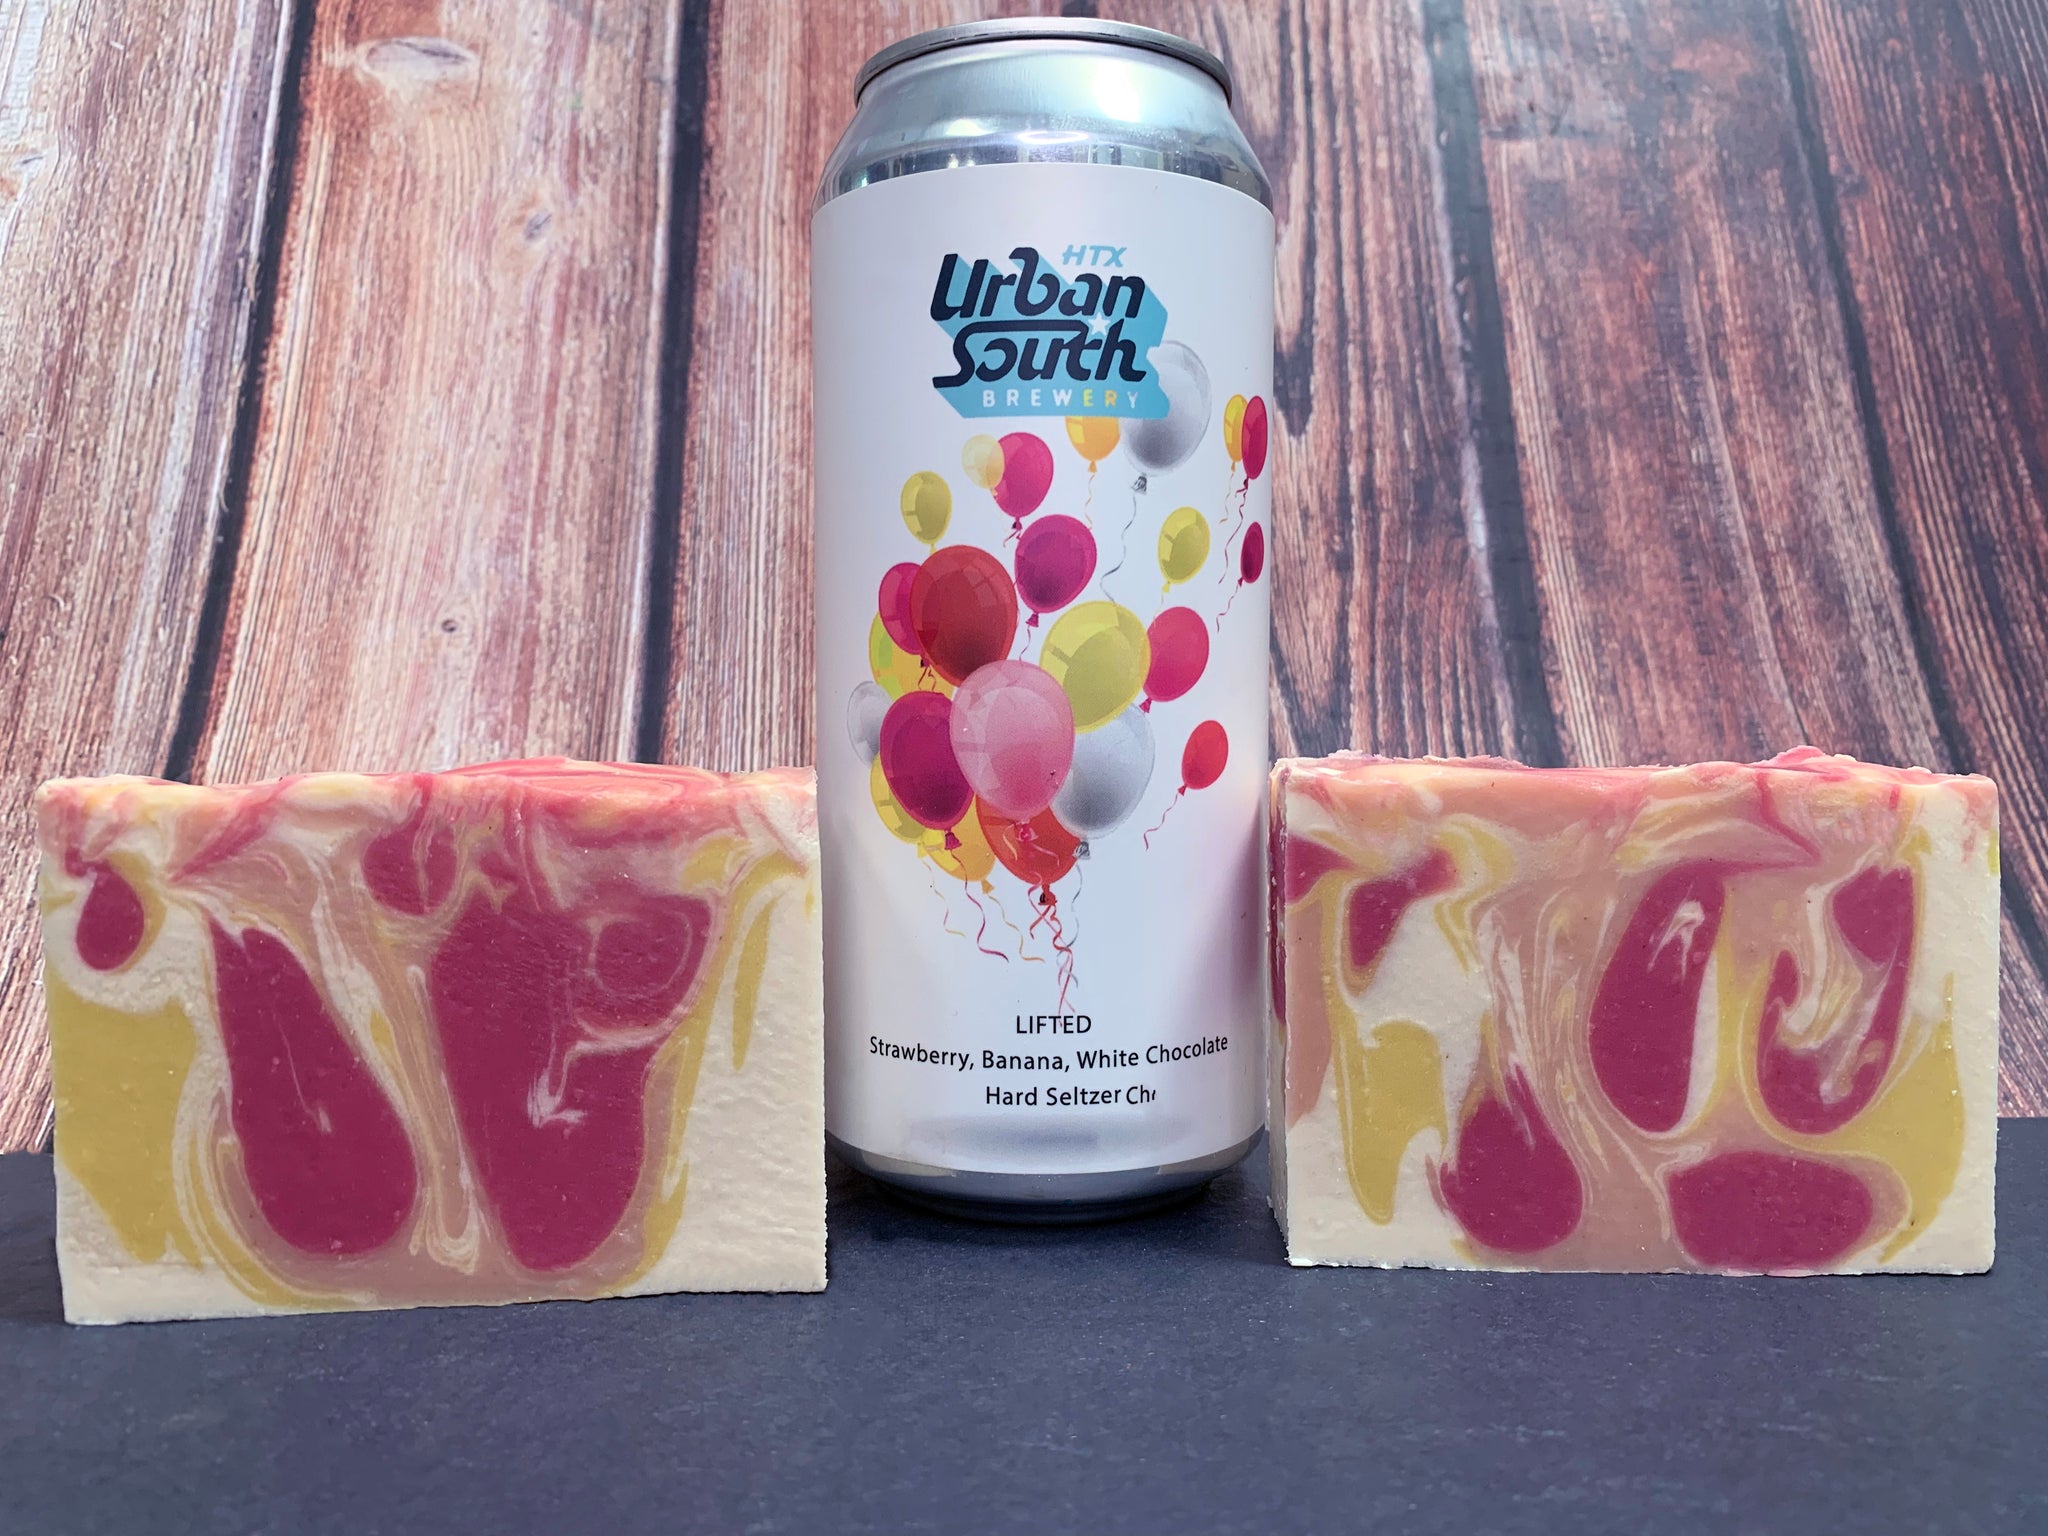 craft seltzer soap yellow red and pink seltzer soap for her handmade in texas with lifted strawberry banana white chocolate hard seltzer from urban south htx brewery houston texas craft brewery spunkndisorderly craft beer soap handmade cold process soap spunkndisorderly